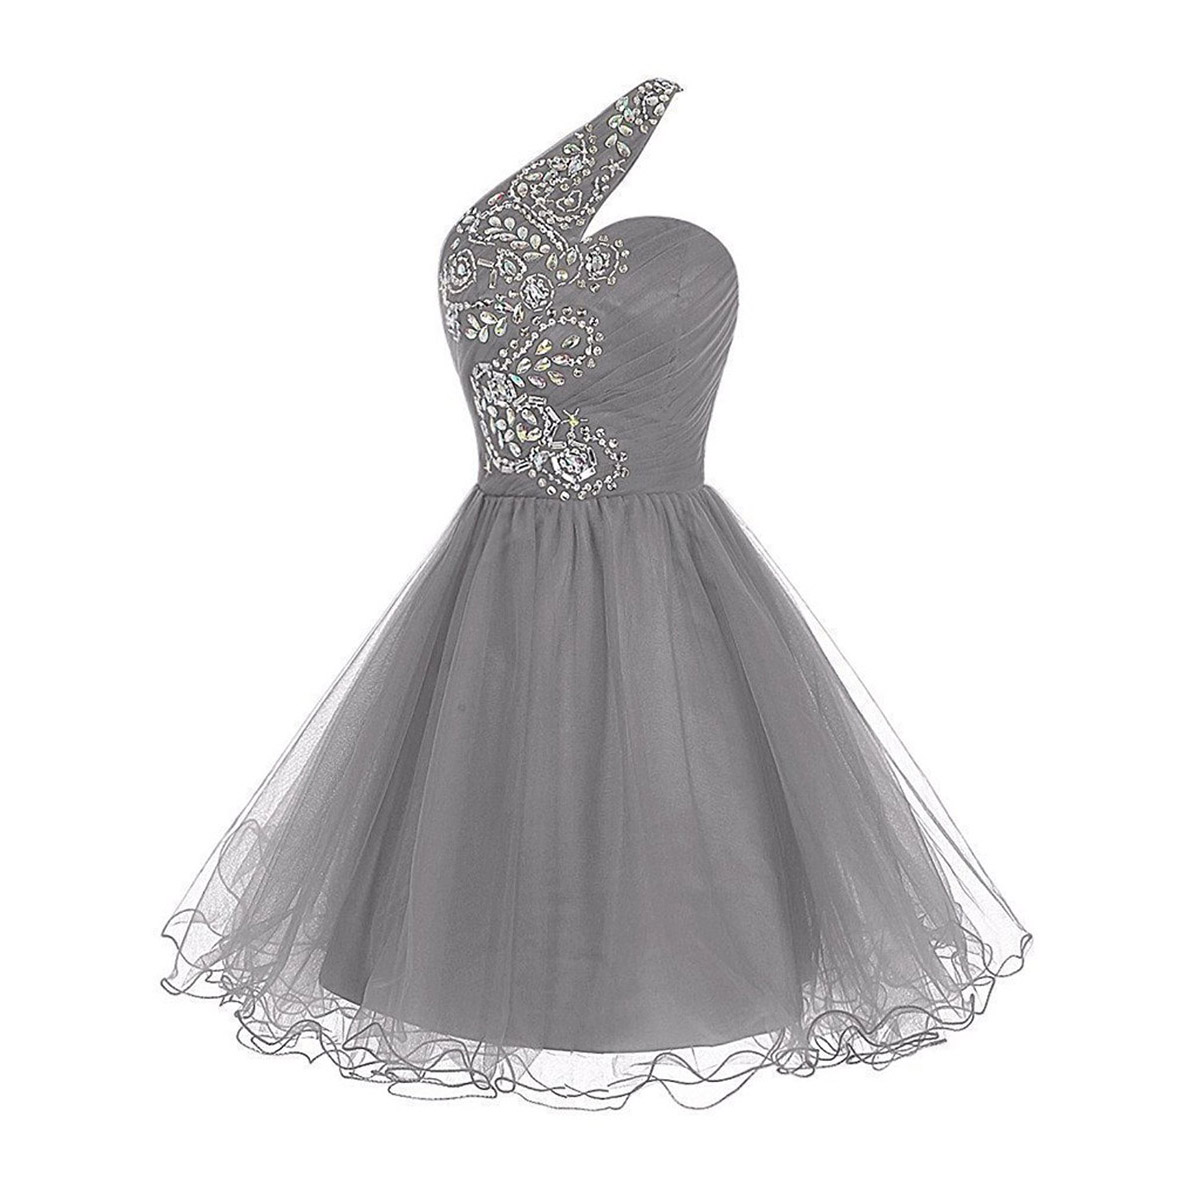 Flower Beaded One Shoulder Ruched Prom Dress, Light Grey Lace-up Short Prom Dress, Sleeveless Princess Mini Tulle Prom Dress